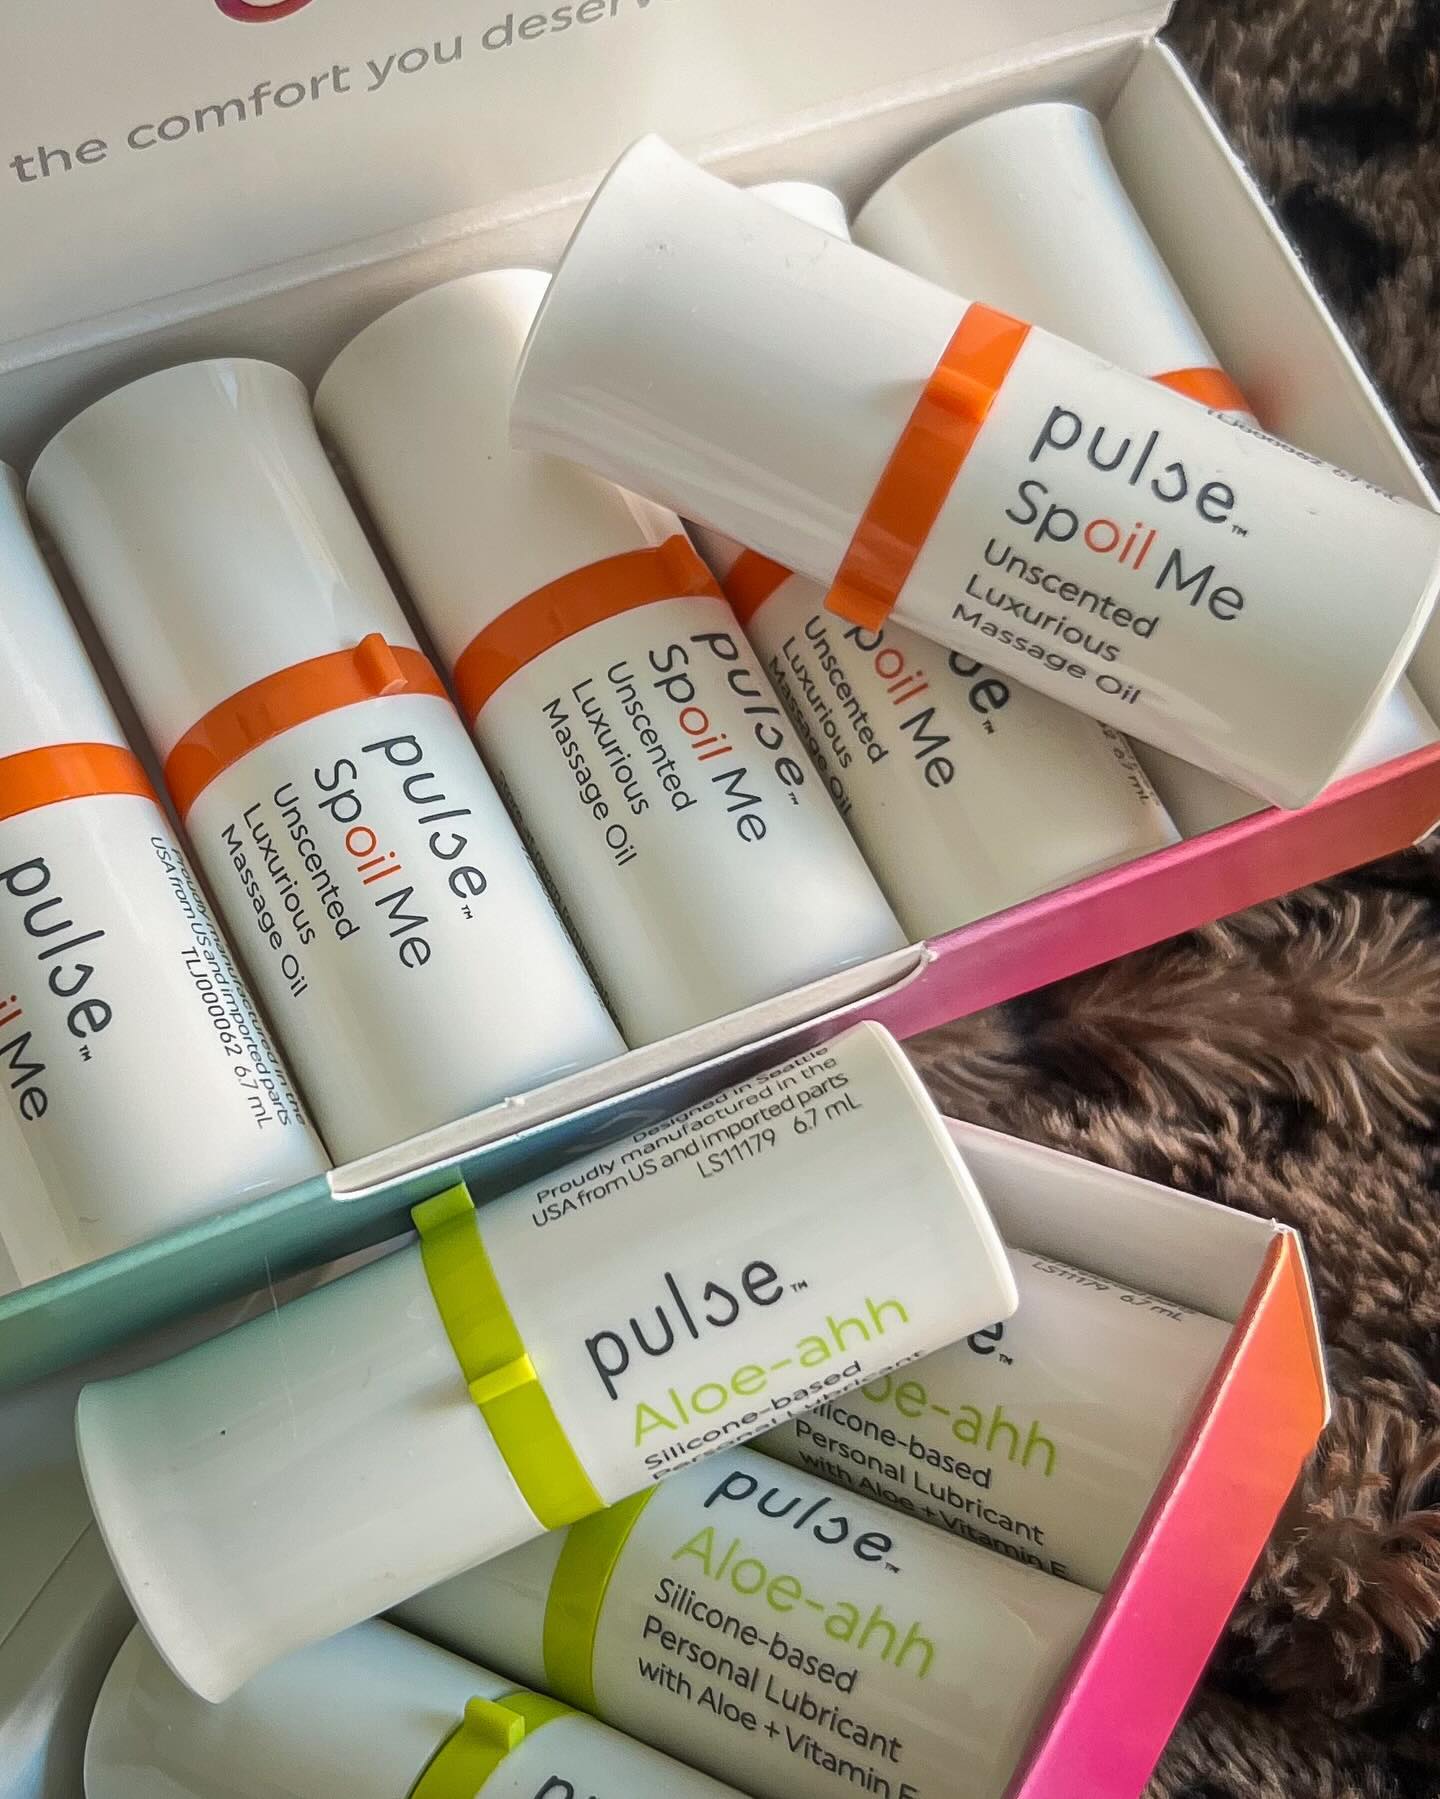 @lovemypulse is running a special RIGHT NOW and that’s $50 off Pulse Warmers and there is a 20% discount if you sign up for monthly subscription for the lubes and massage oils! You can choose the frequency you’d like so you don’t run out ;) #gifted